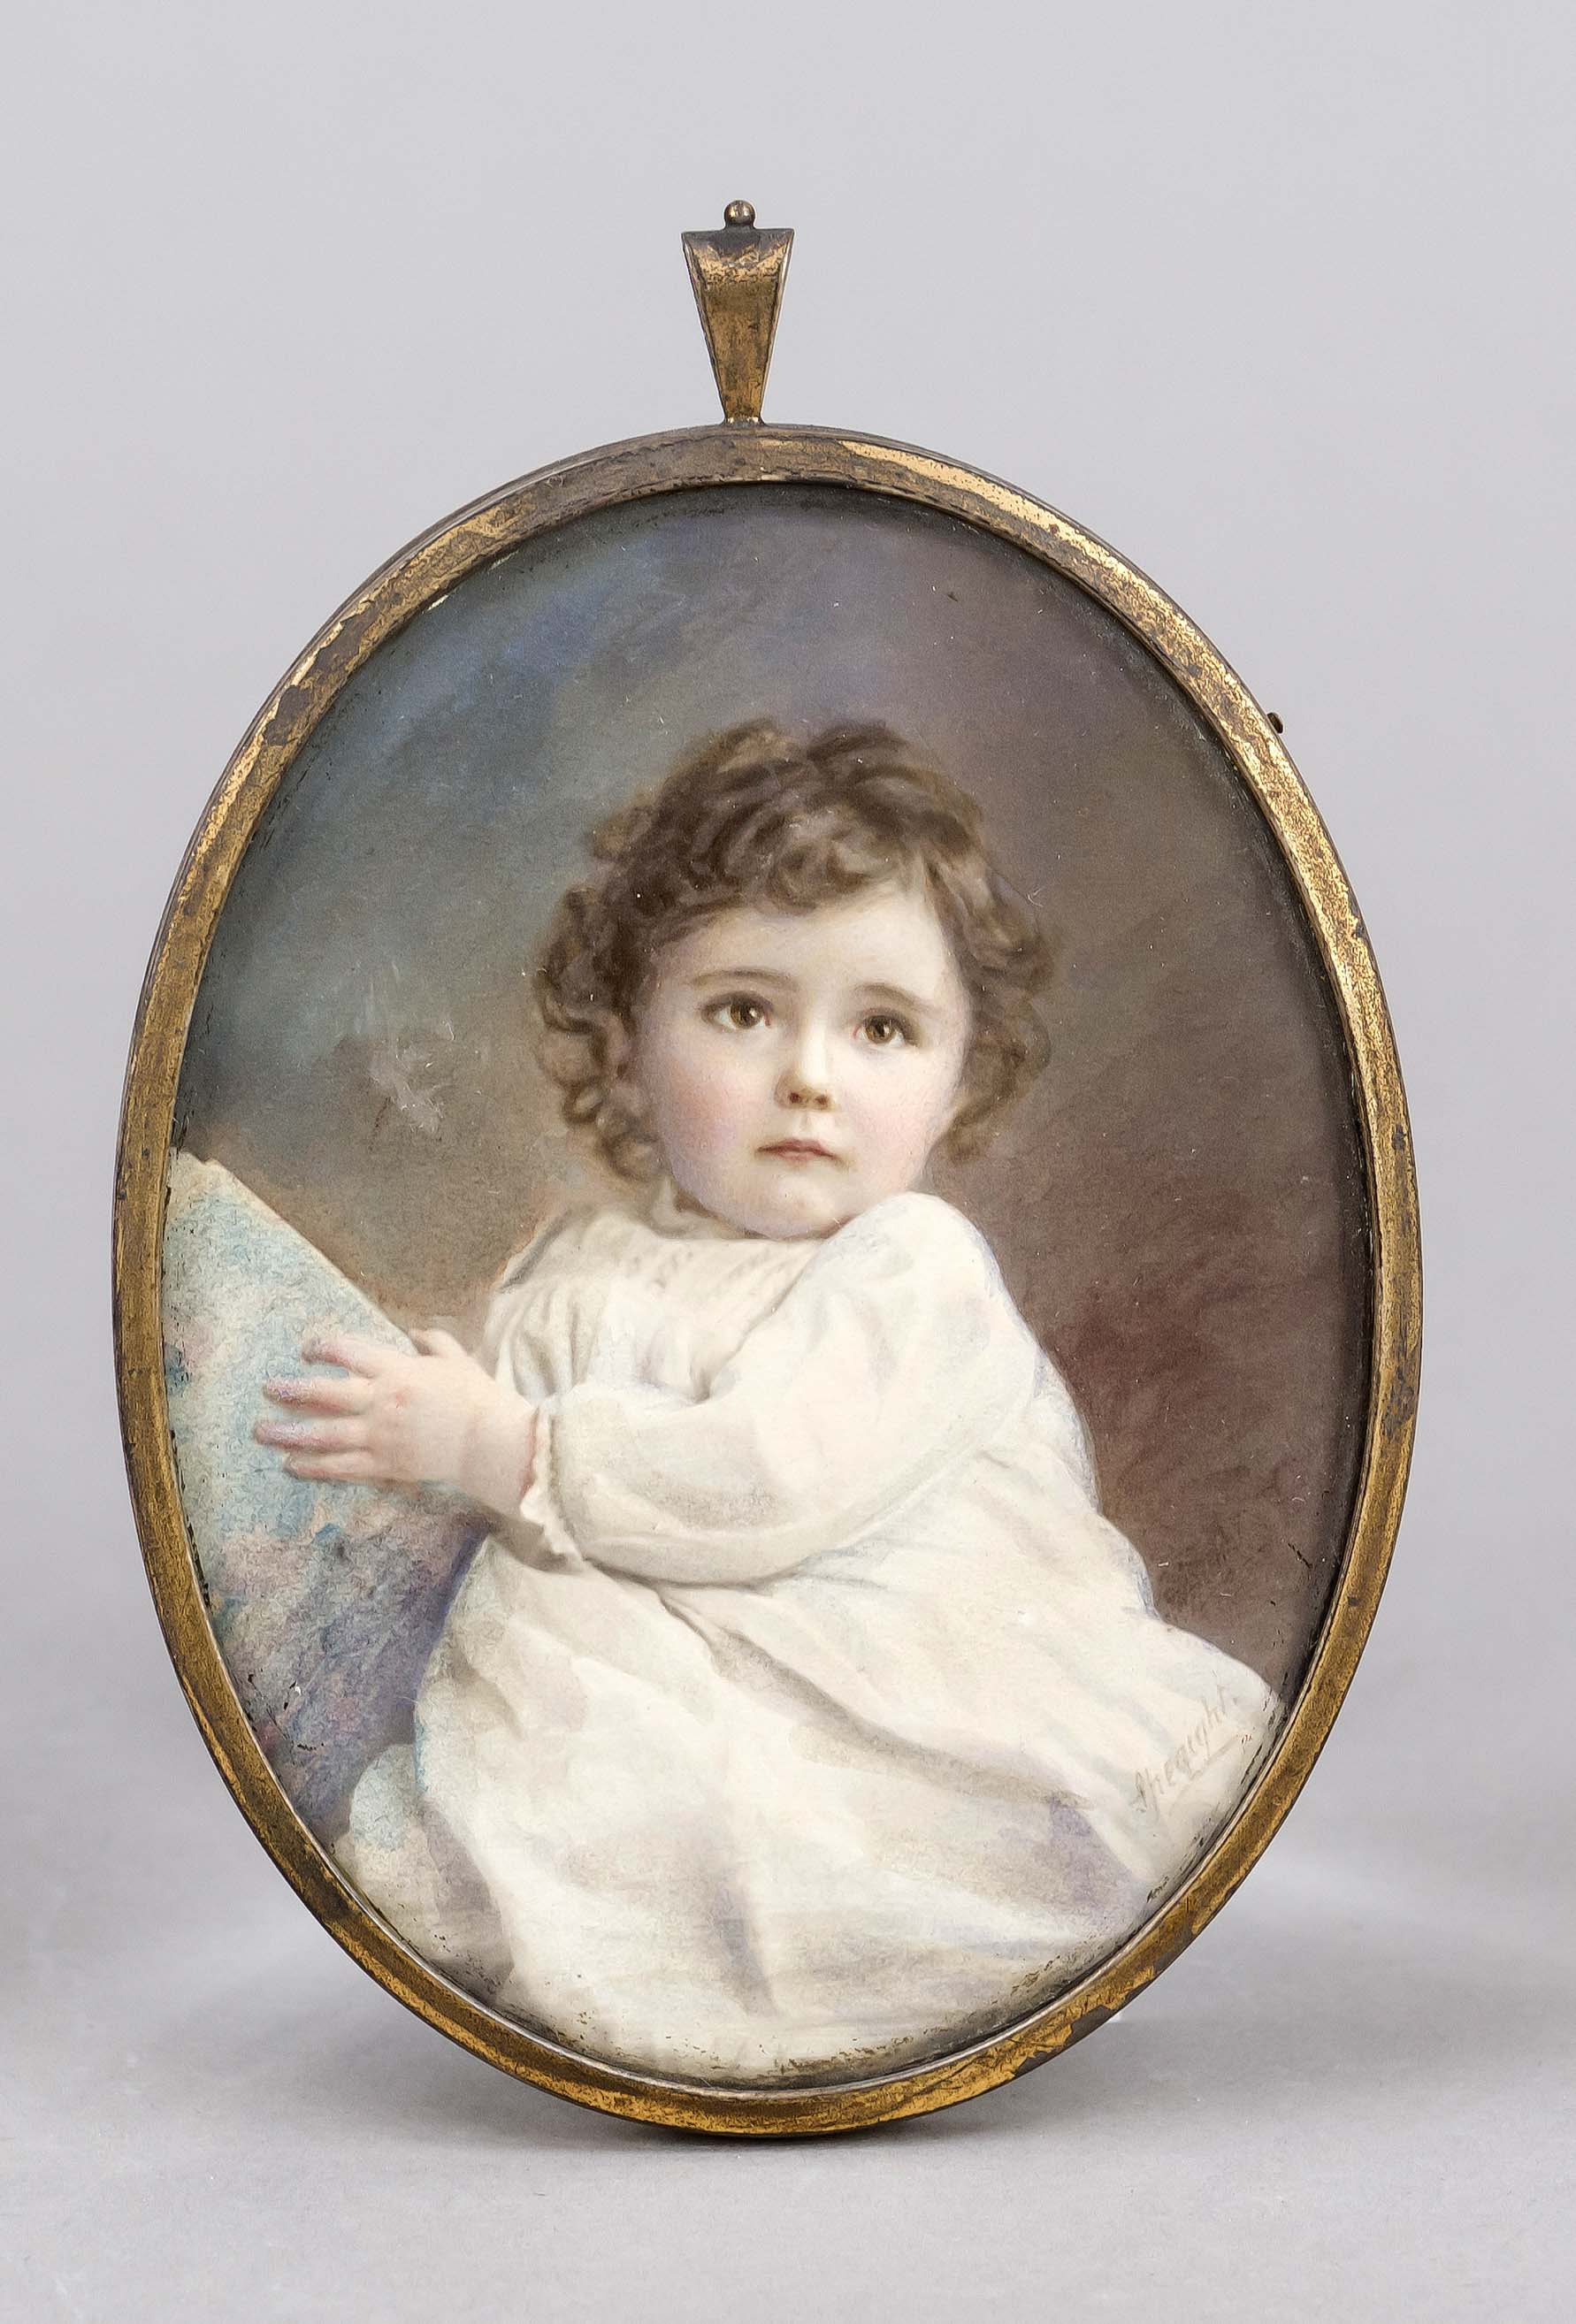 Oval miniature, England, early 20th century, polychrome tempera painting. Toddler in a white dress